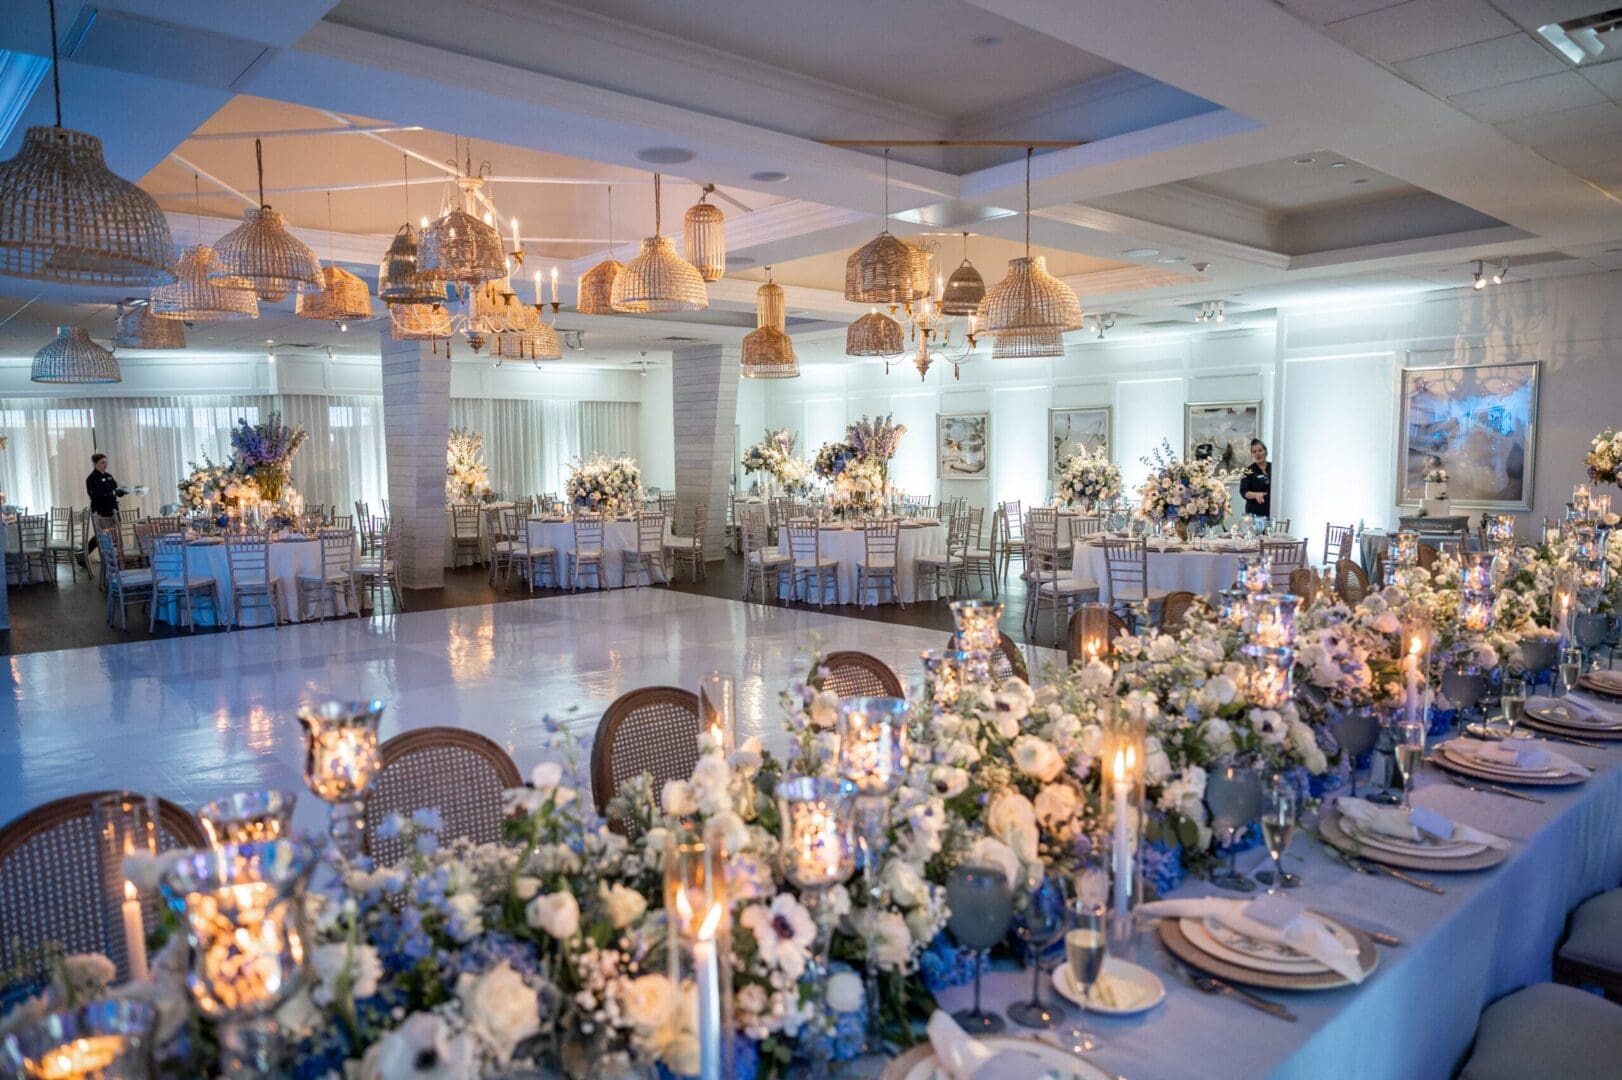 A wedding reception set up with white linens and candles, showcasing elegant wedding tablescape ideas.